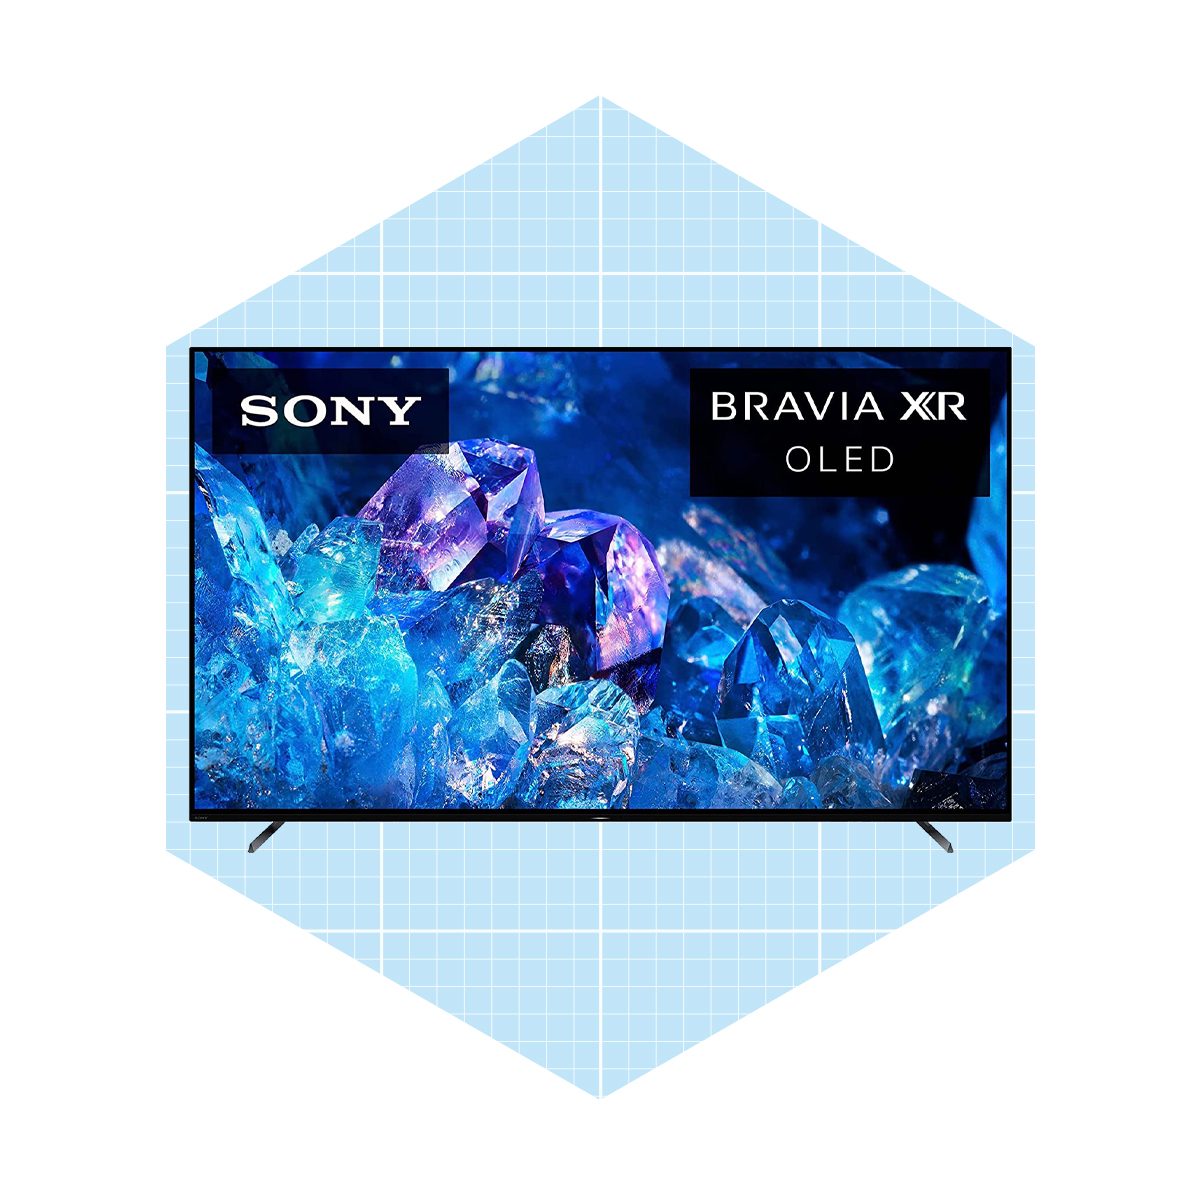 Sony 65 Inch 4k Ultra Hd Tv A80k Series Bravia Xr Oled Smart Google Tv With Dolby Vision Hdr And Exclusive Features Ecomm Amazon.com